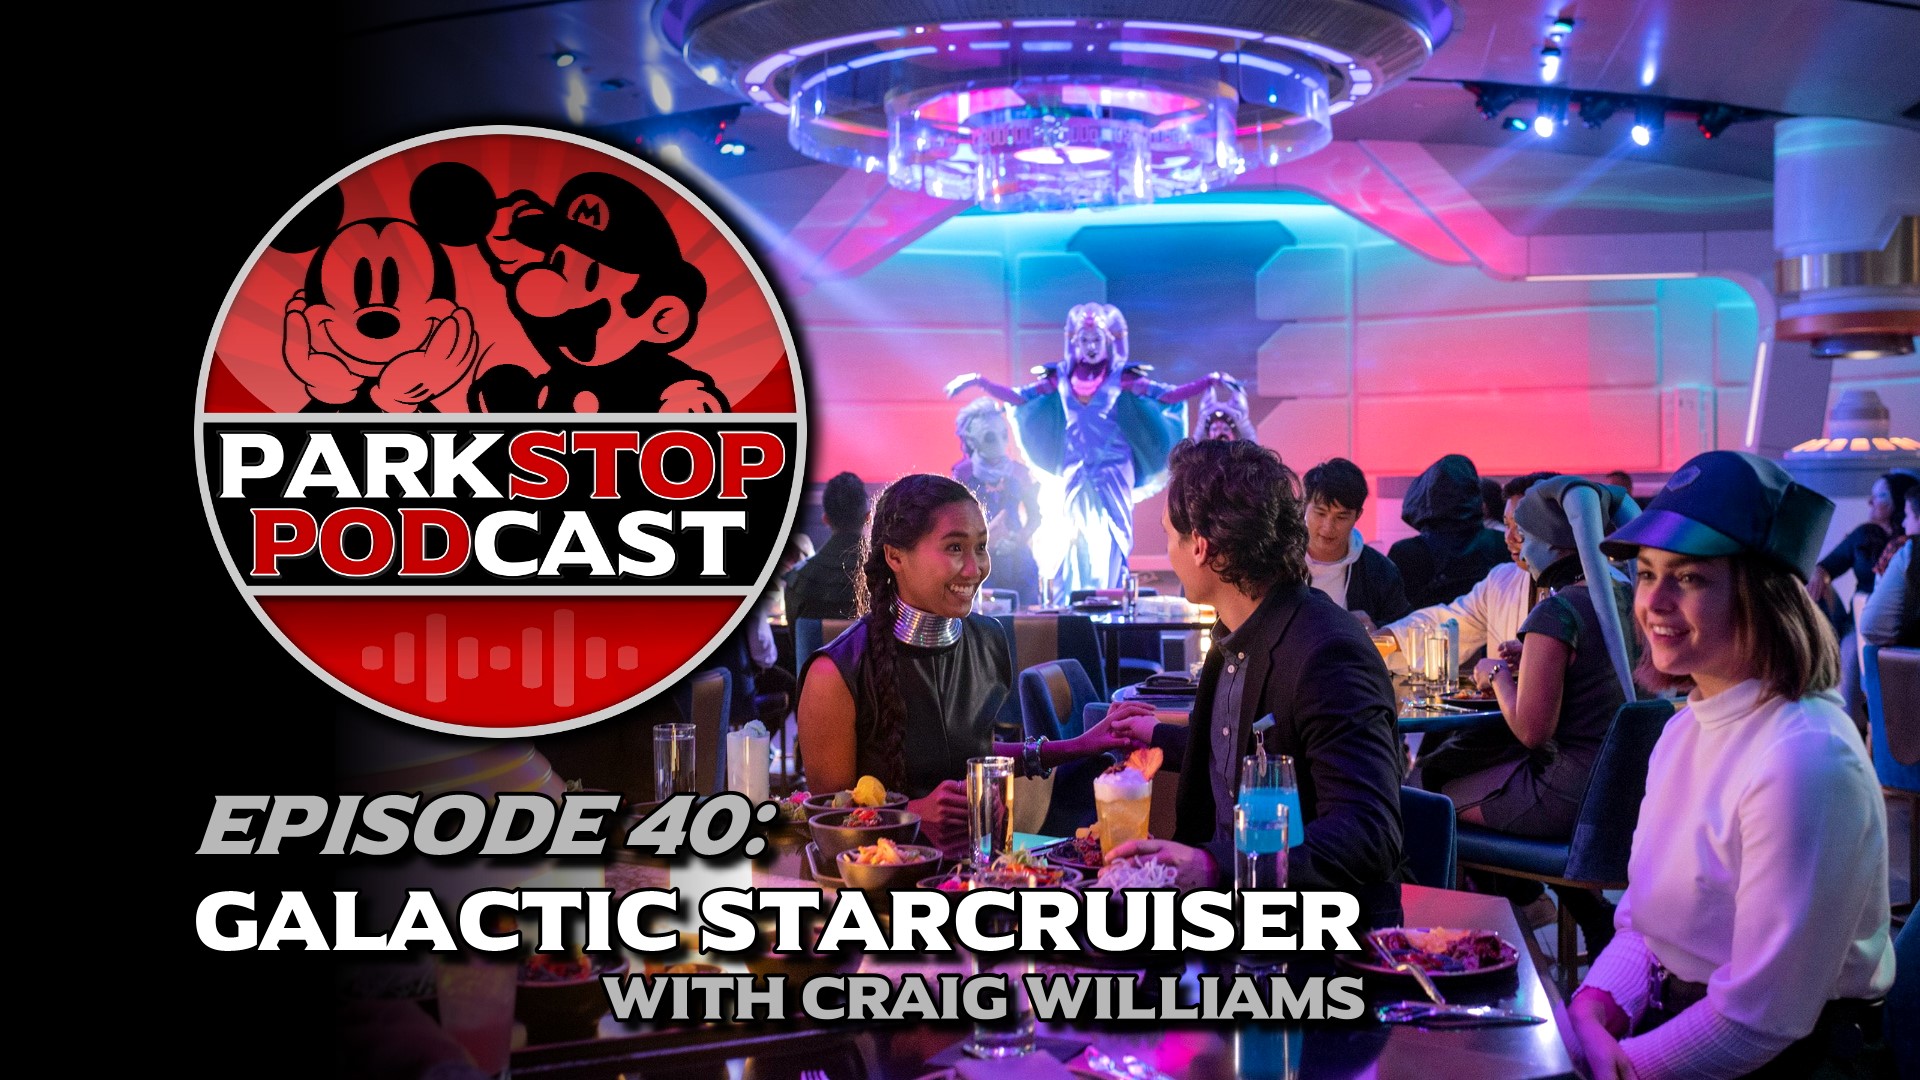 ParkStop Podcast: Episode 40 – Star Wars Galactic Starcruiser